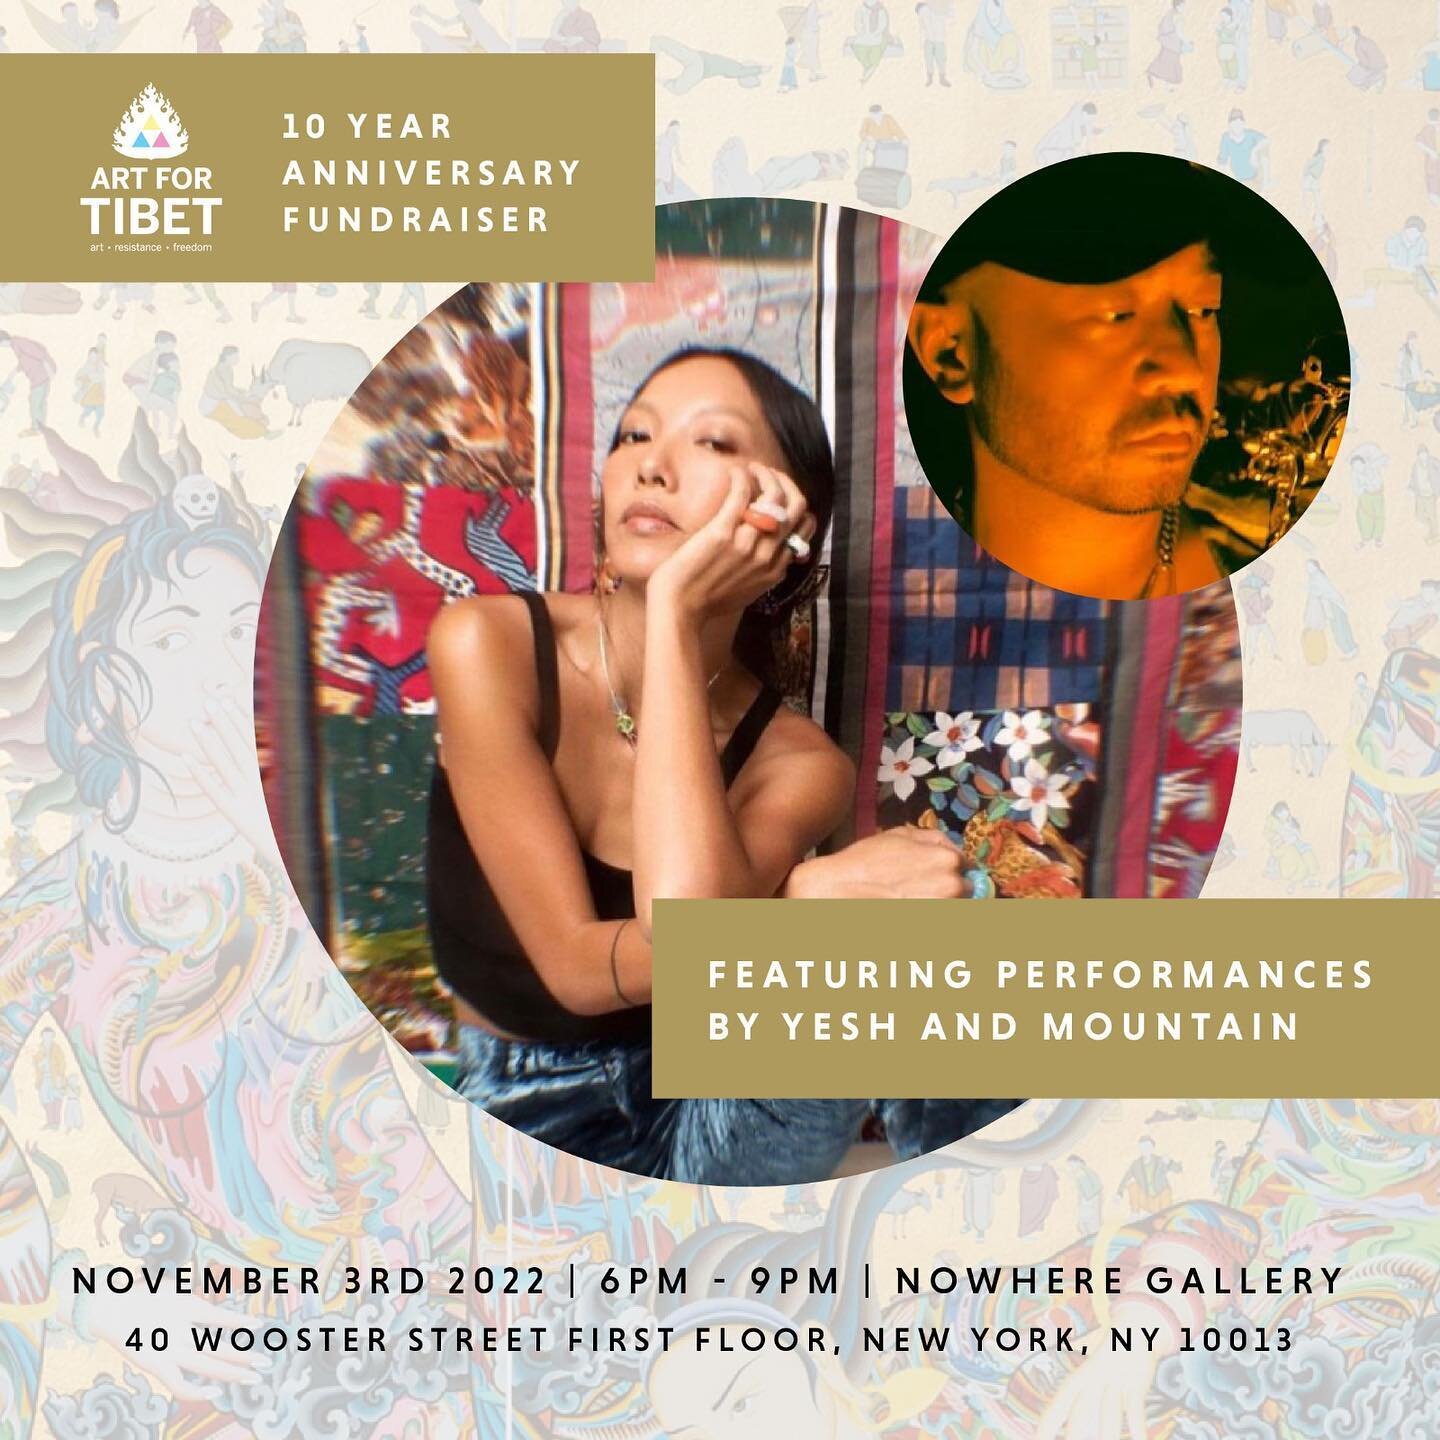 Thursday's Art for Tibet event at NowHere Gallery will include a performance by the dazzling Yesh, the contemporary Tibetan singer &amp; performer, accompanied by the NY-based Mountain. You won't want to miss it! The esteemed DJ Hanzi will also be se